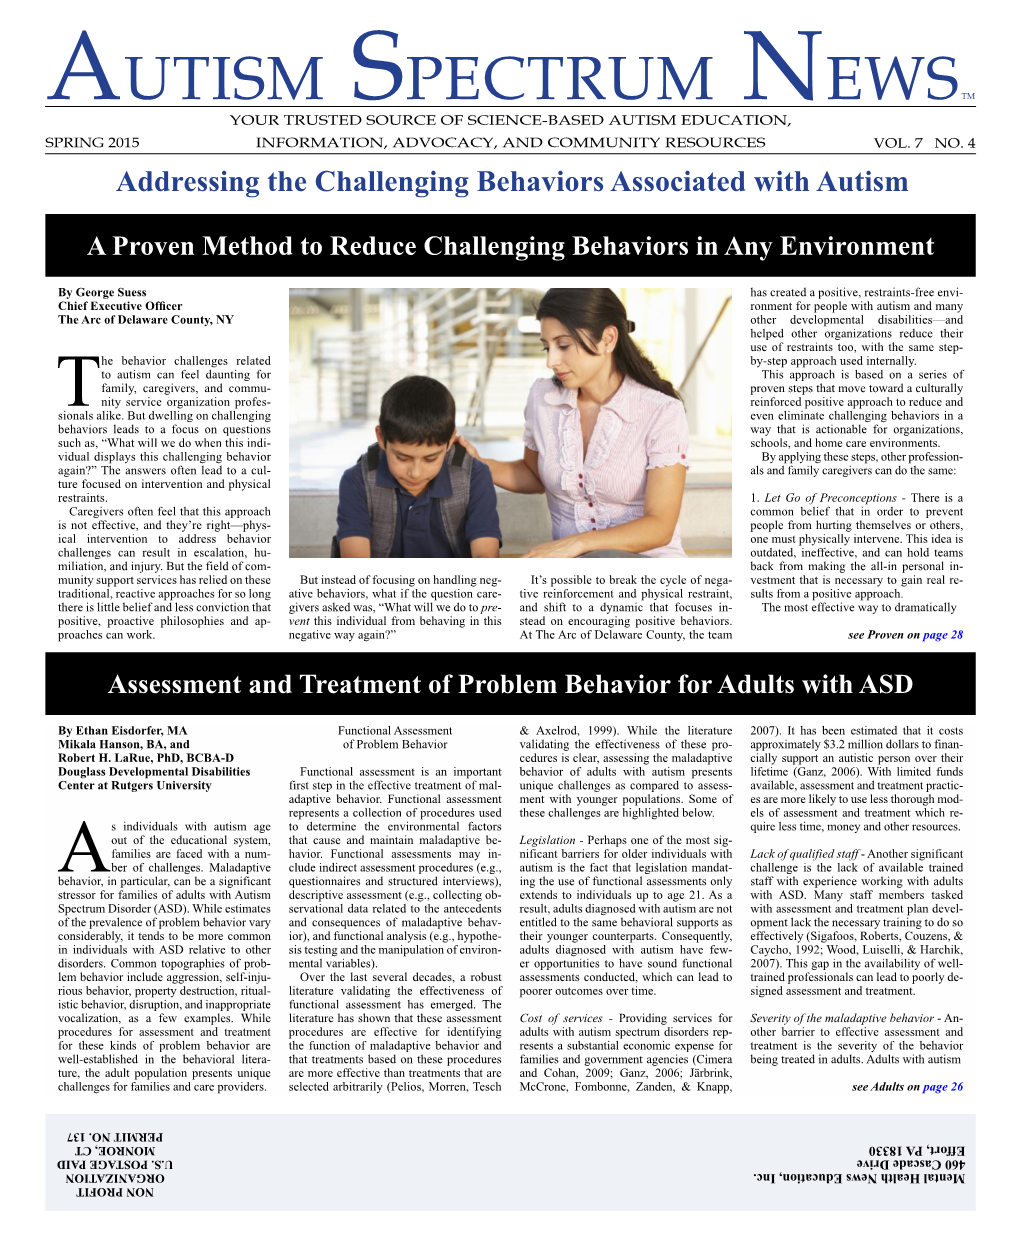 Addressing the Challenging Behaviors Associated with Autism